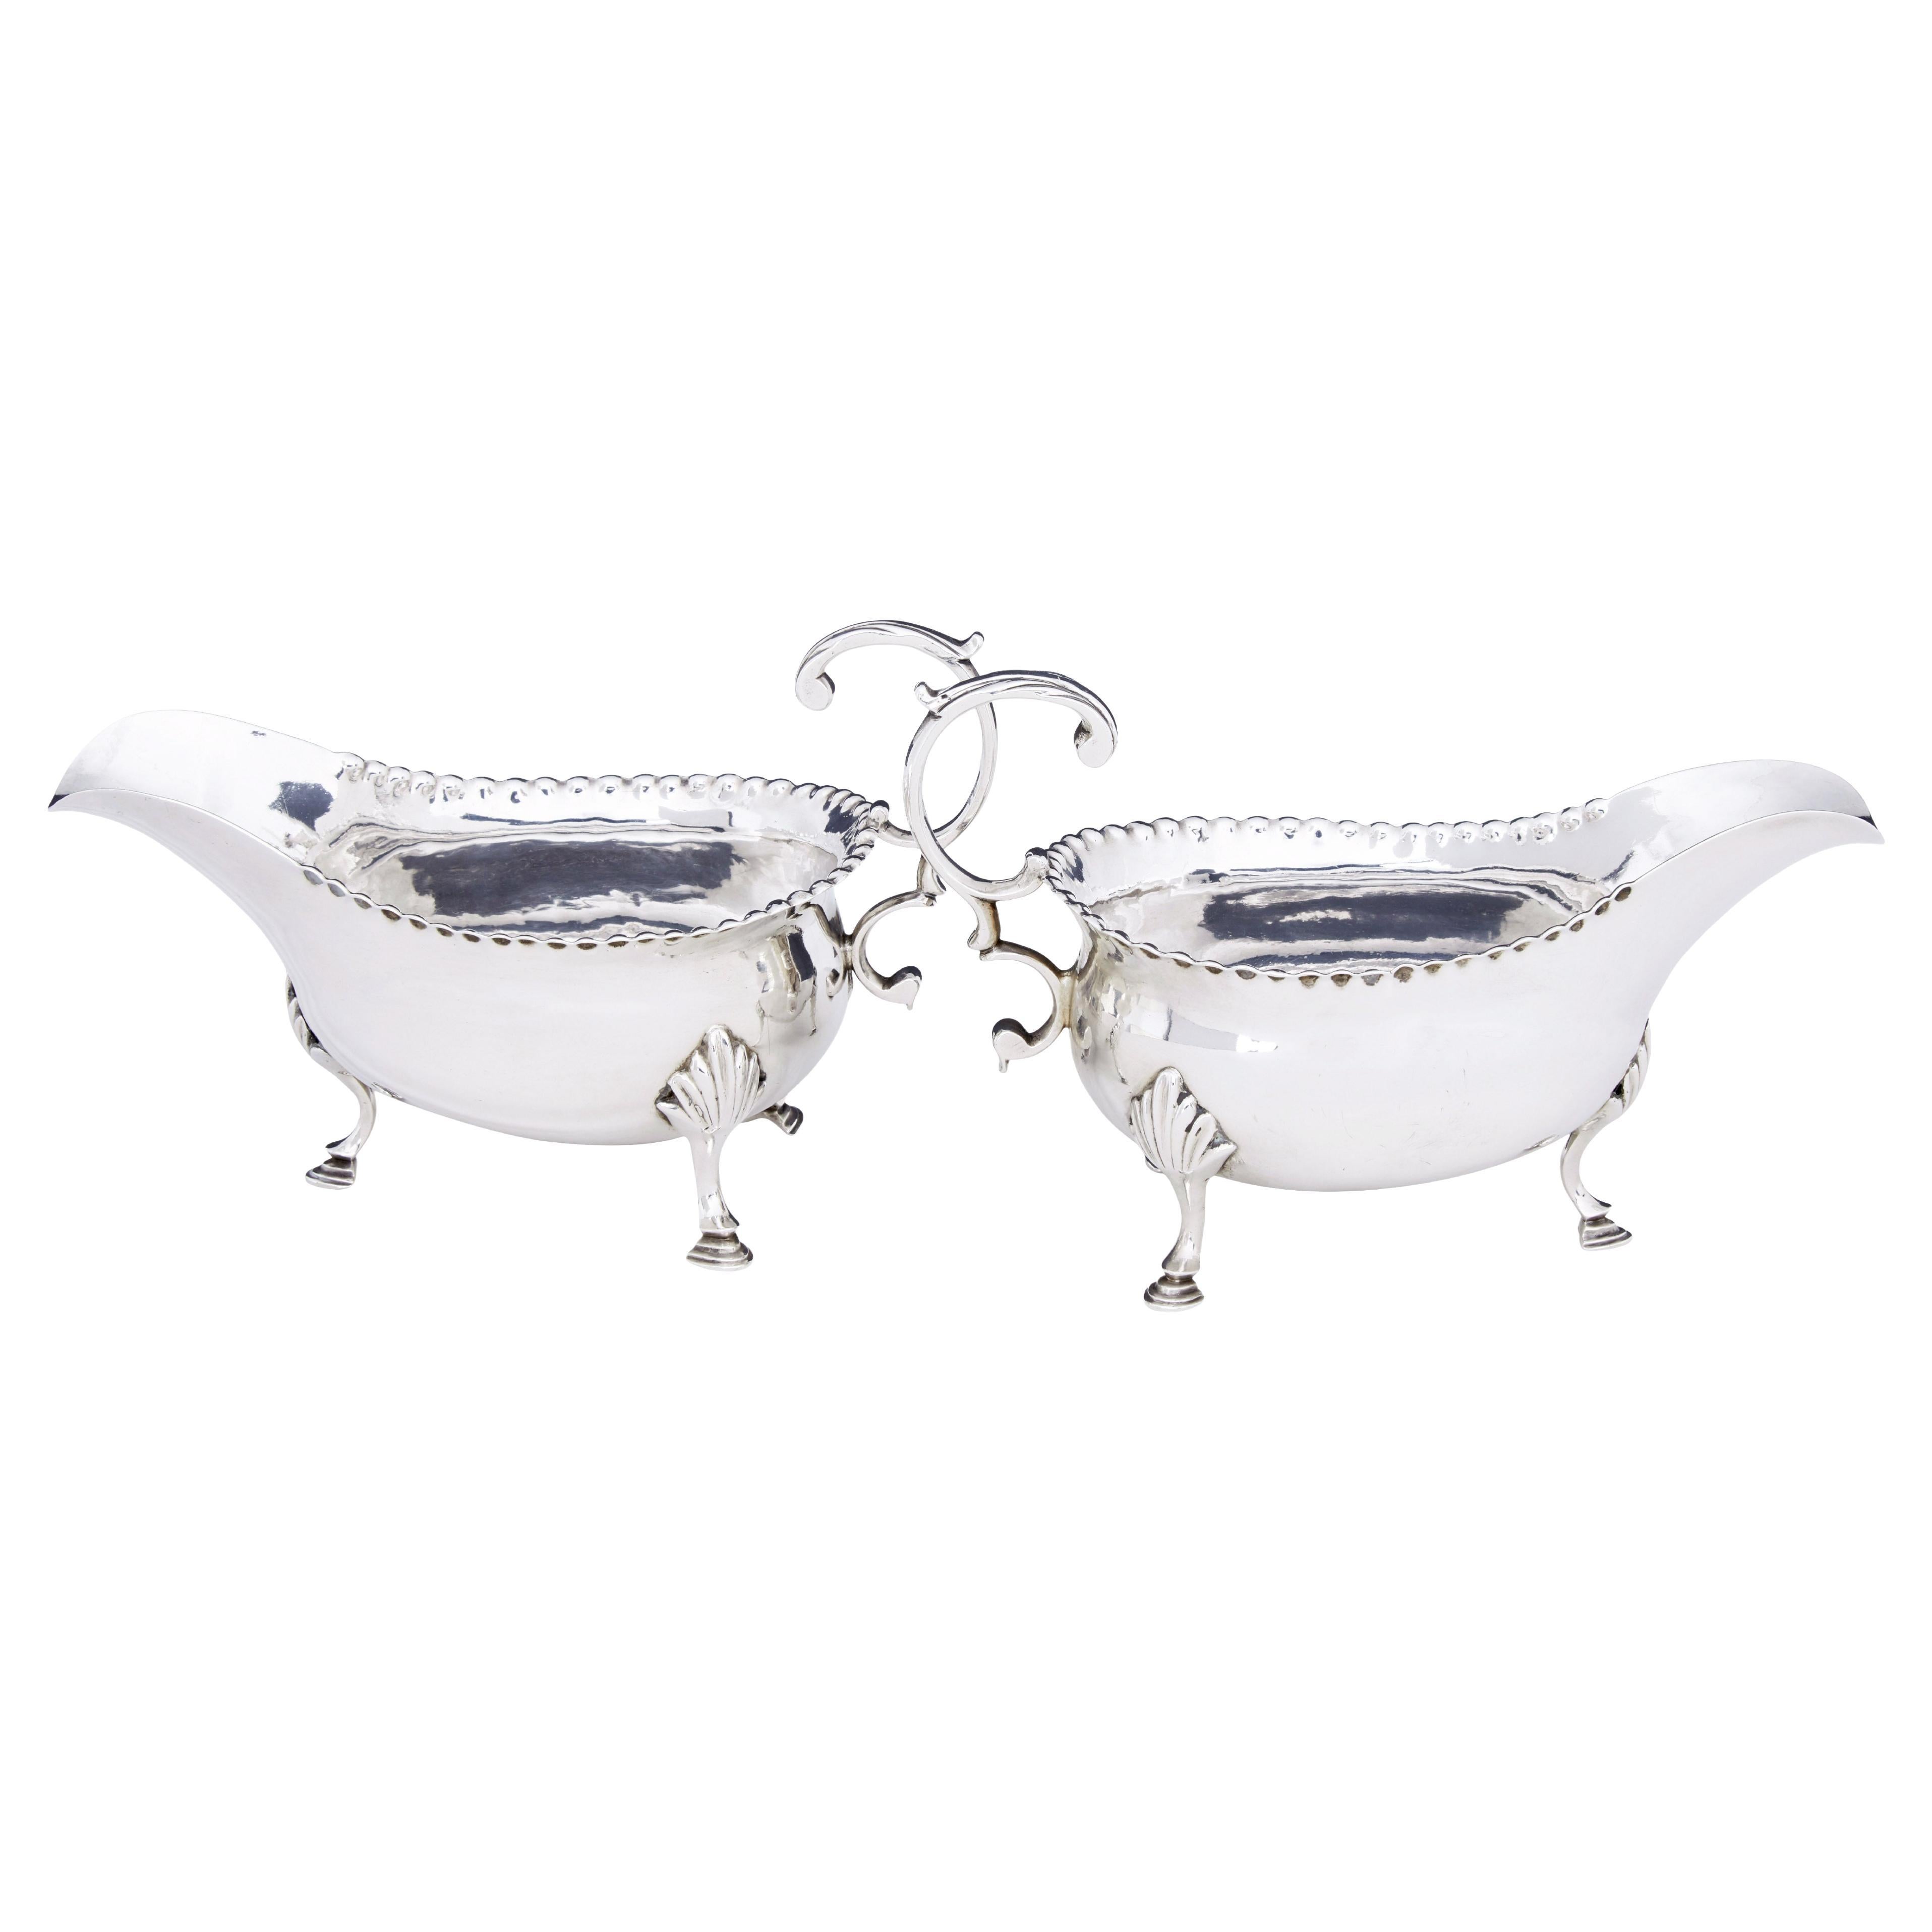 Pair of 18th century silver sauce boats by Hester Bateman For Sale